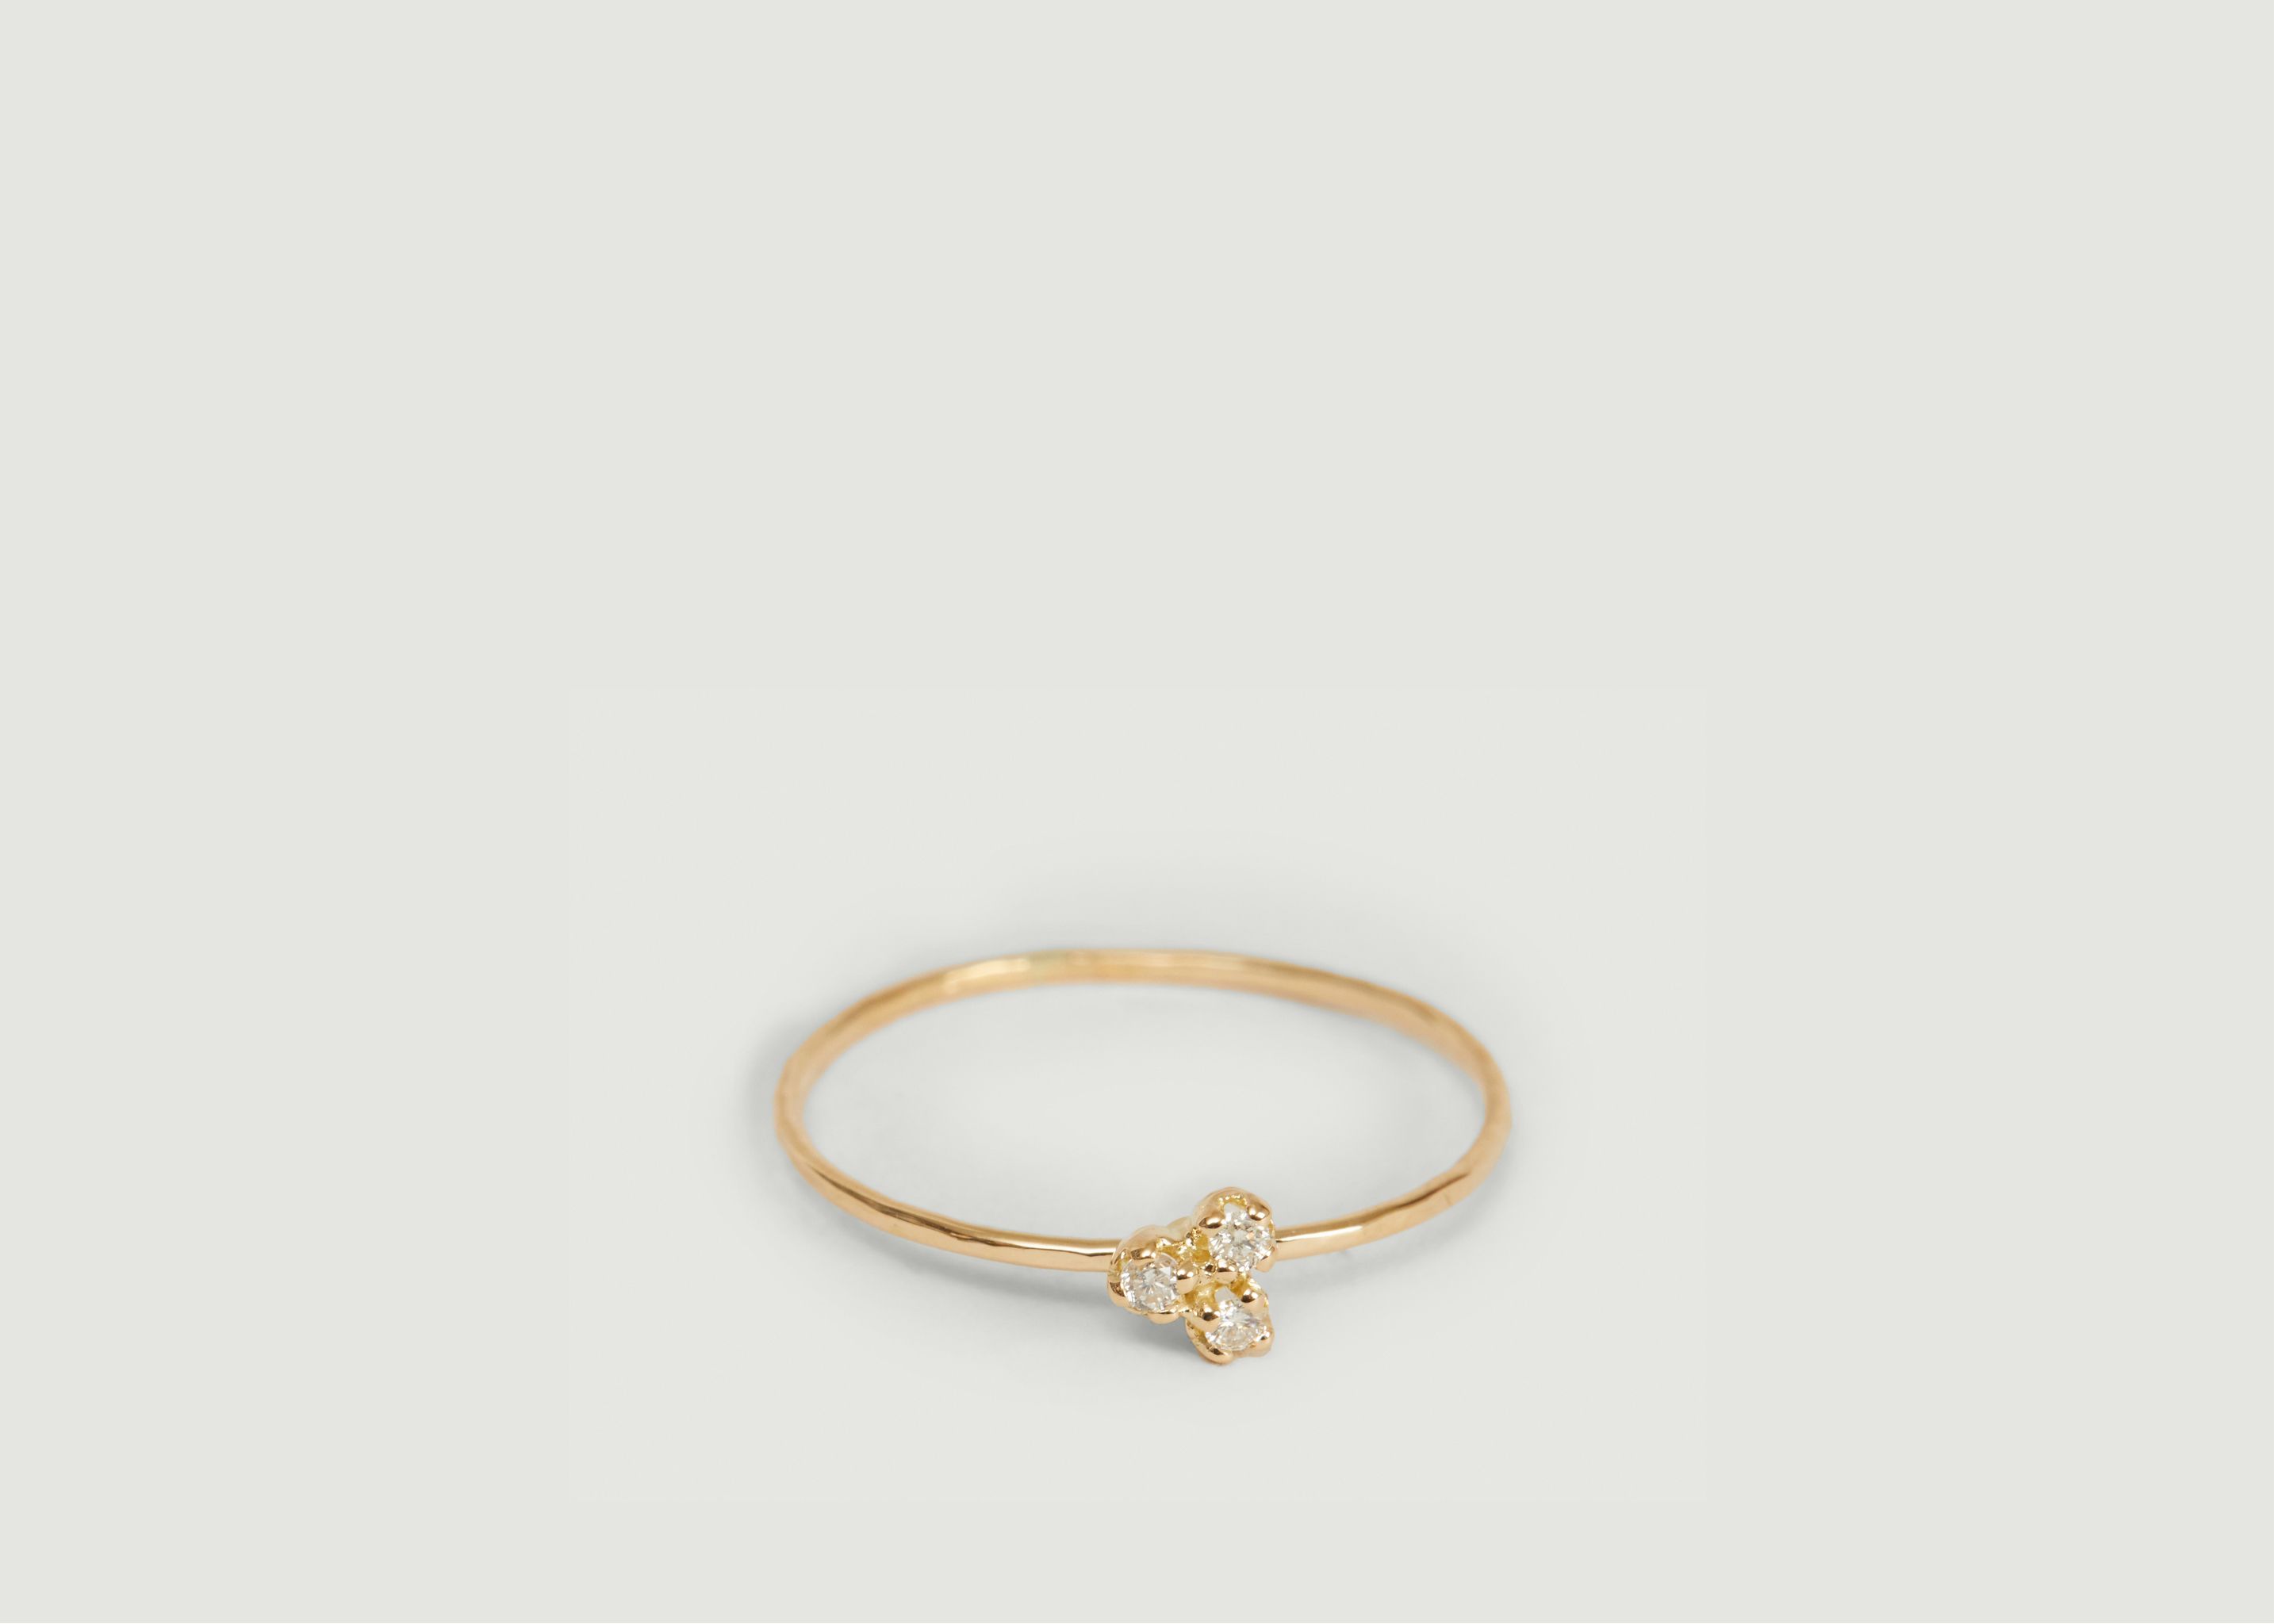 Olympe gold and diamonds ring - Monsieur